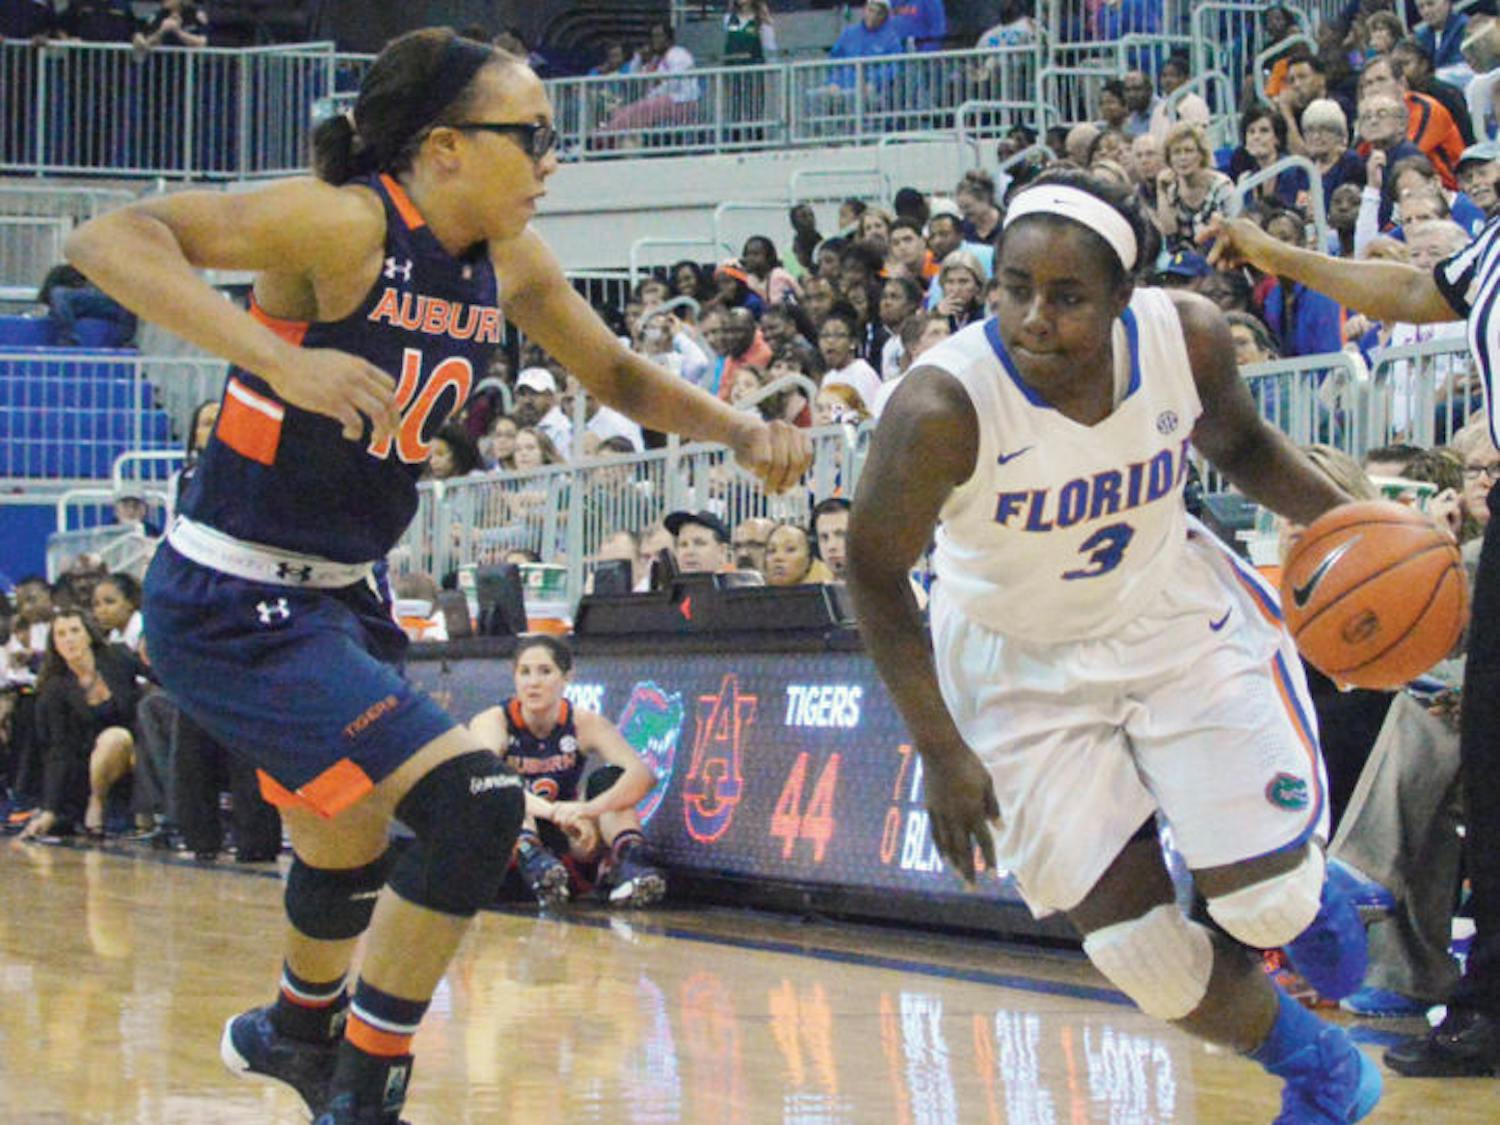 January Miller drives the ball to the net during Florida’s 87-69 win against Auburn on Jan. 26 in the O’Connell Center. Miller scored only five points while turning the ball over three times in UF’s loss to UGA on Sunday.